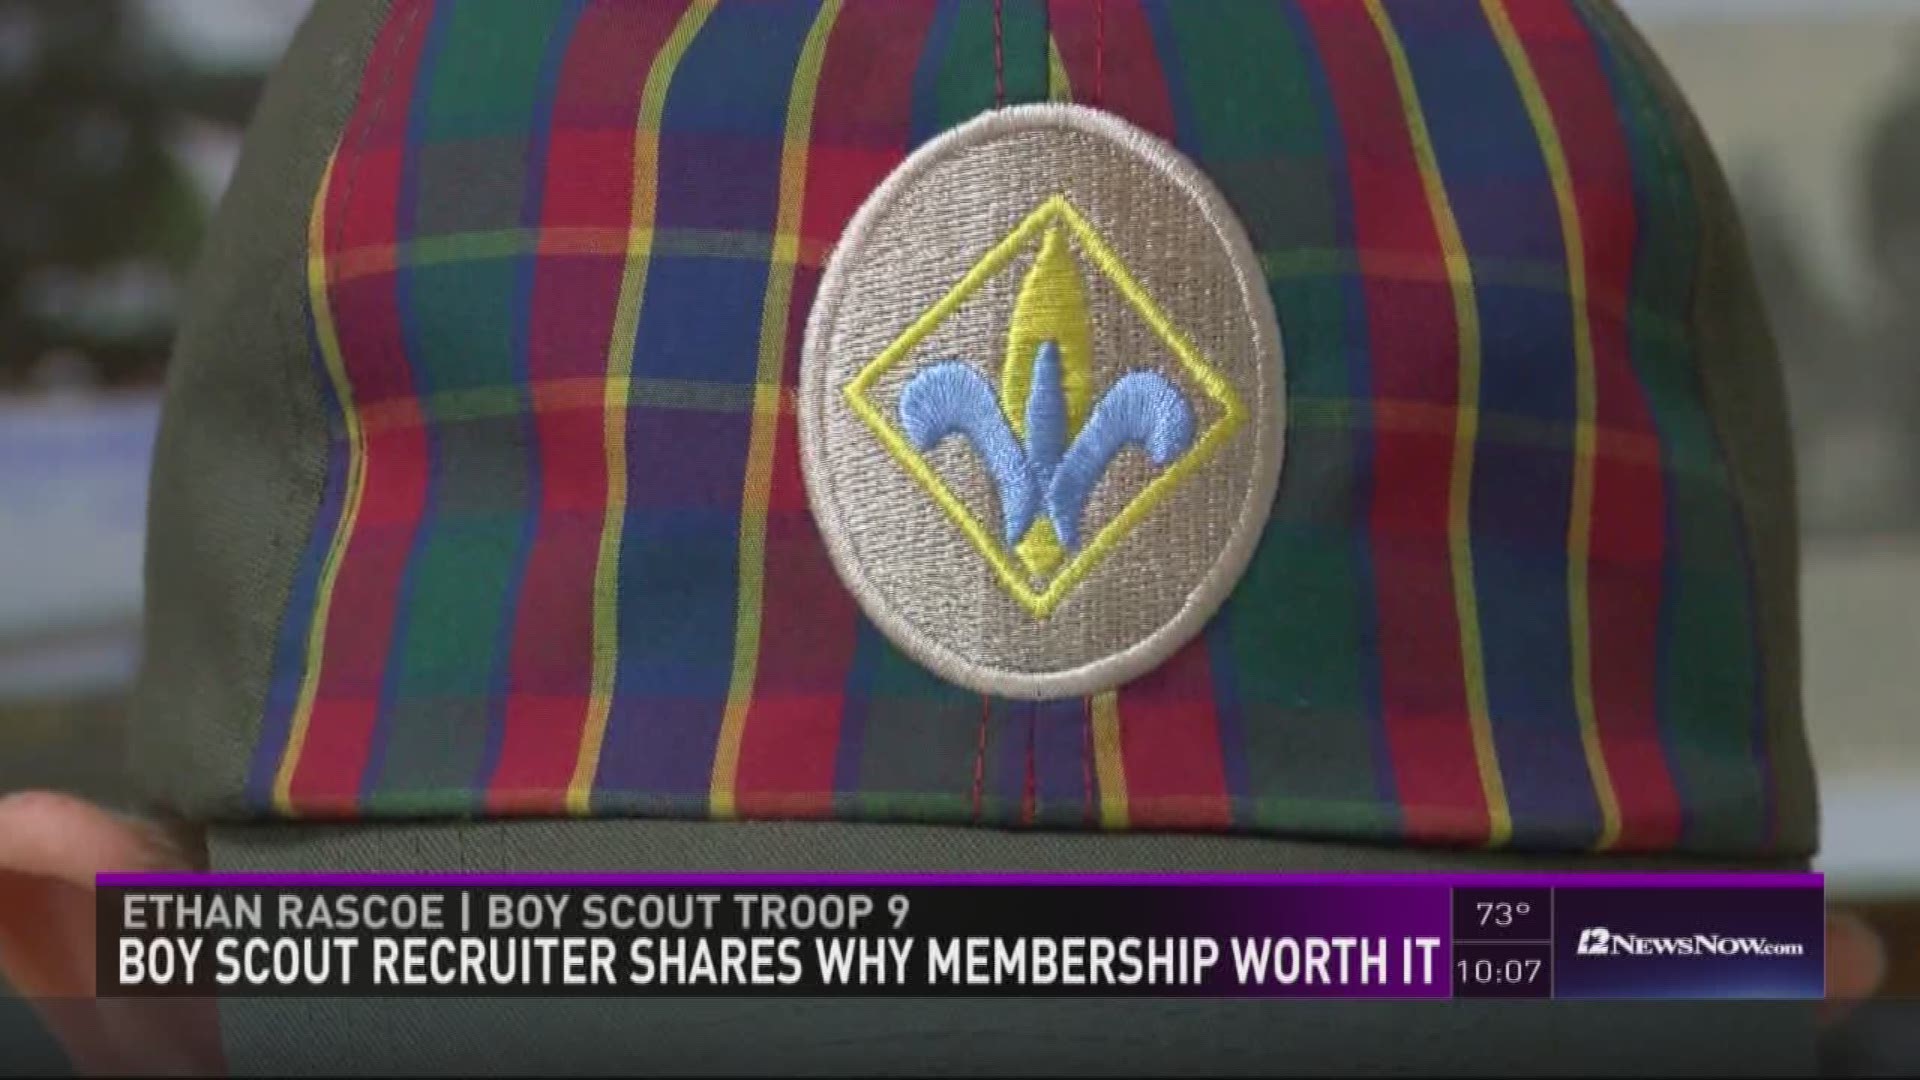 Are the Boy Scouts Still Relevant and Worthwhile Today